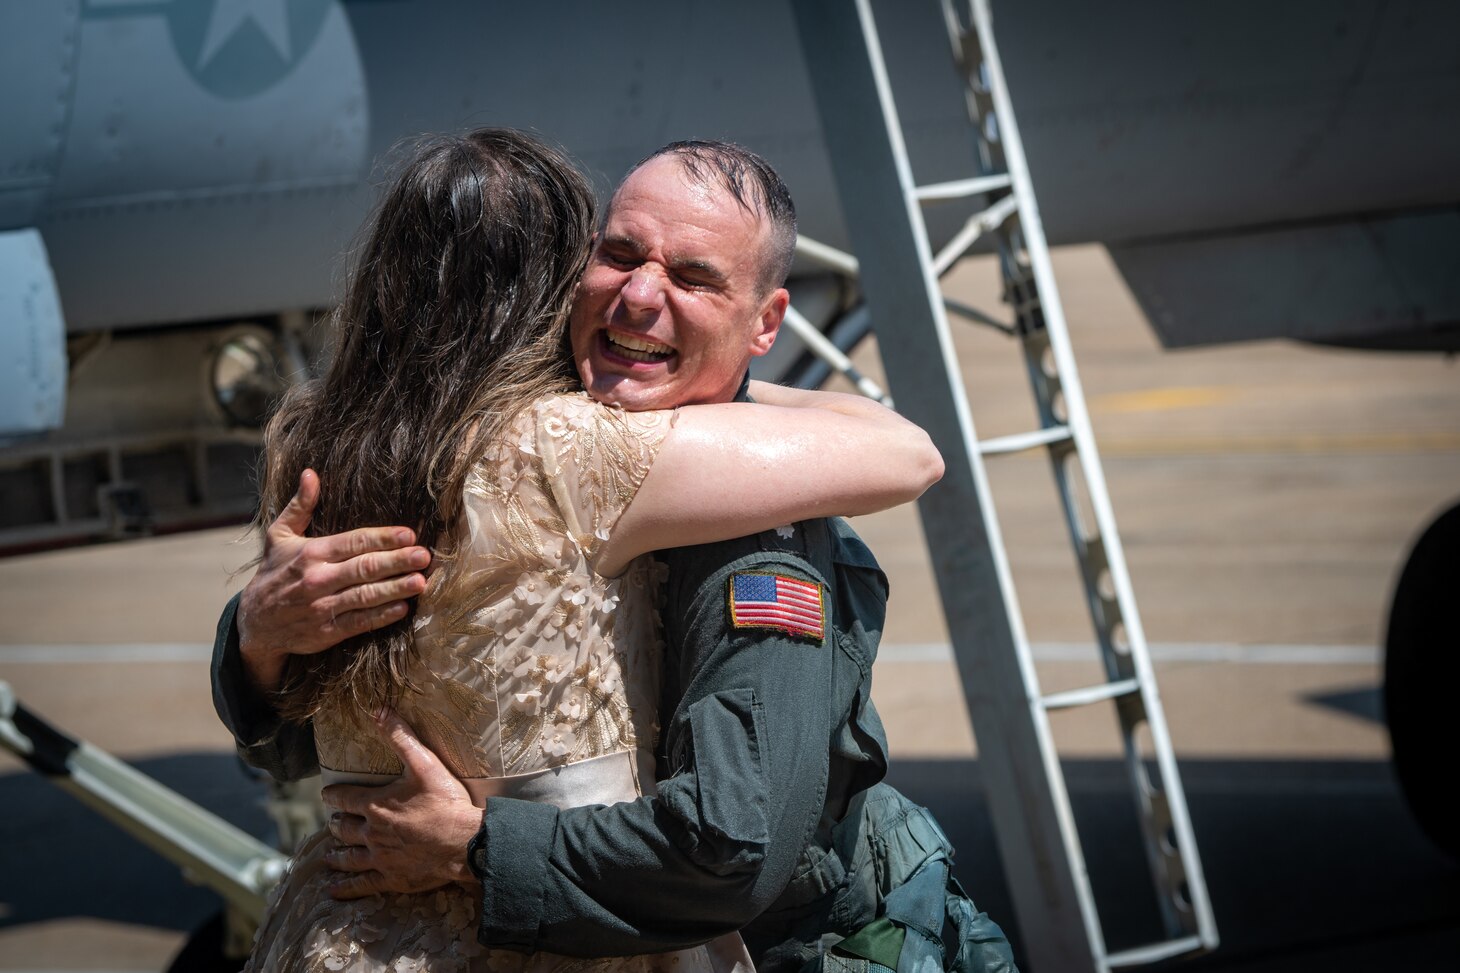 Pilot hugs his wife in front of jets